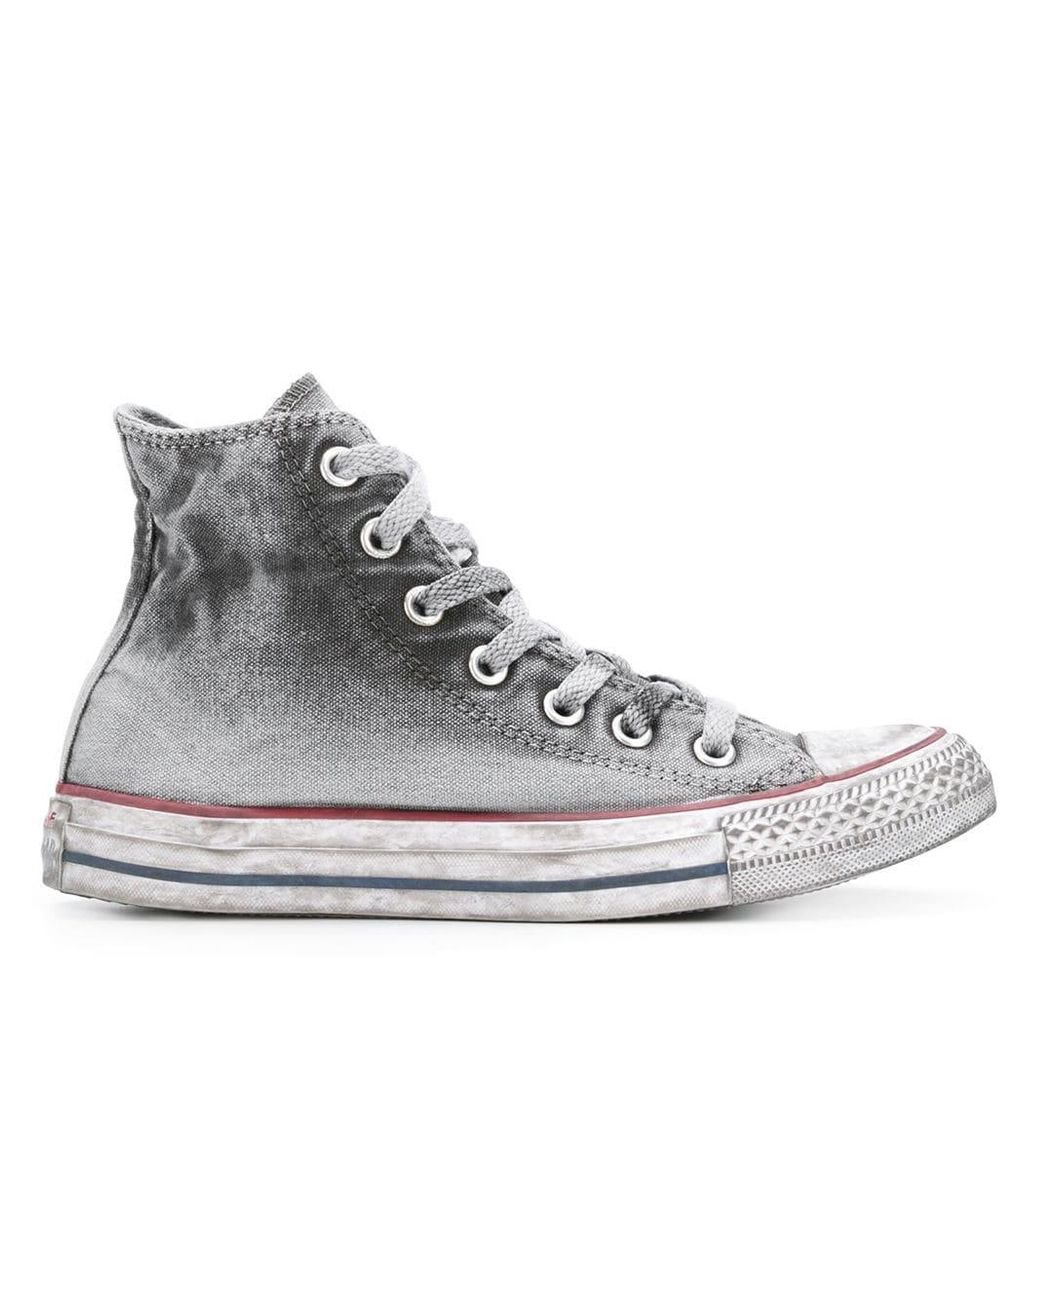 Converse Chuck Taylor All Star Basic Wash Hi-top Sneakers in Gray | Lyst